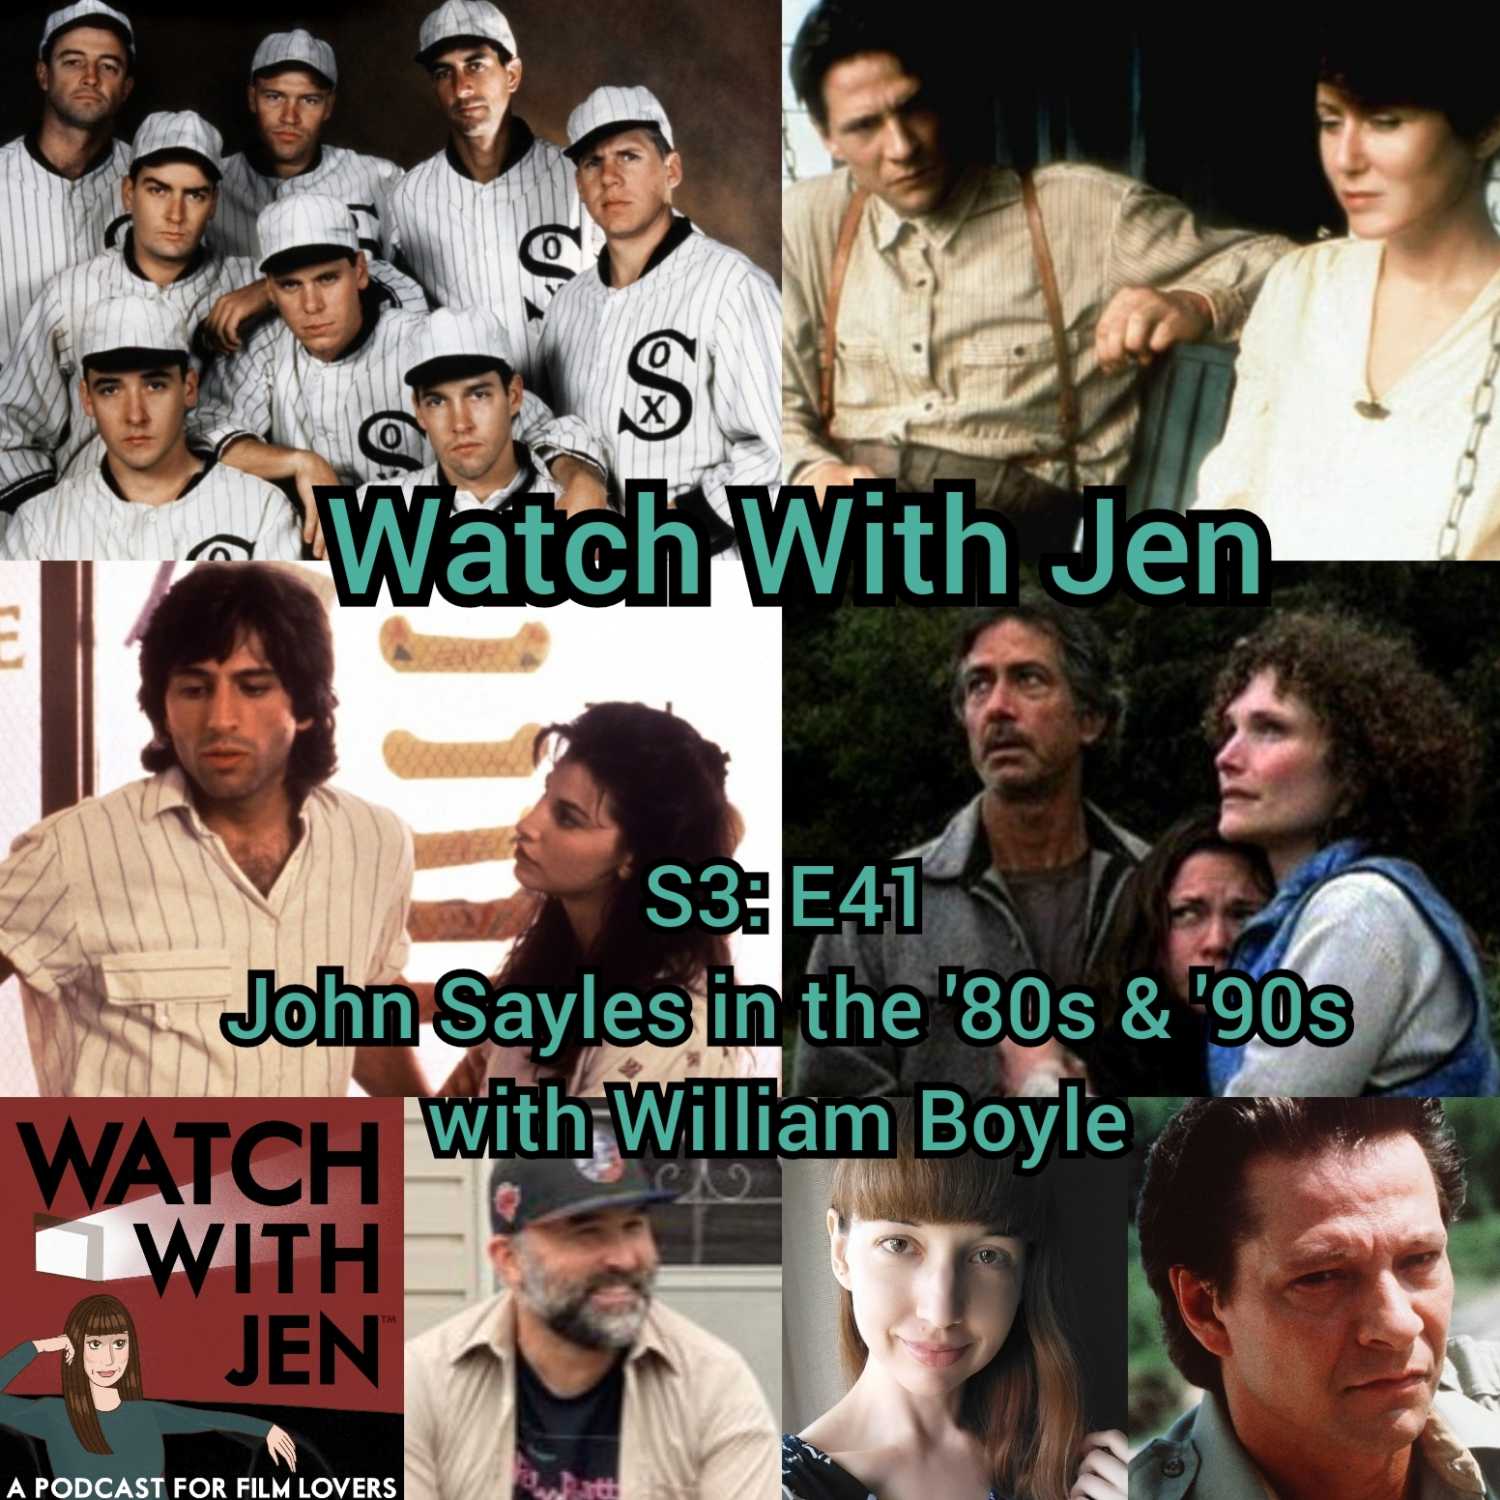 Watch With Jen - S3: E41 - John Sayles in the '80s & '90s with William Boyle